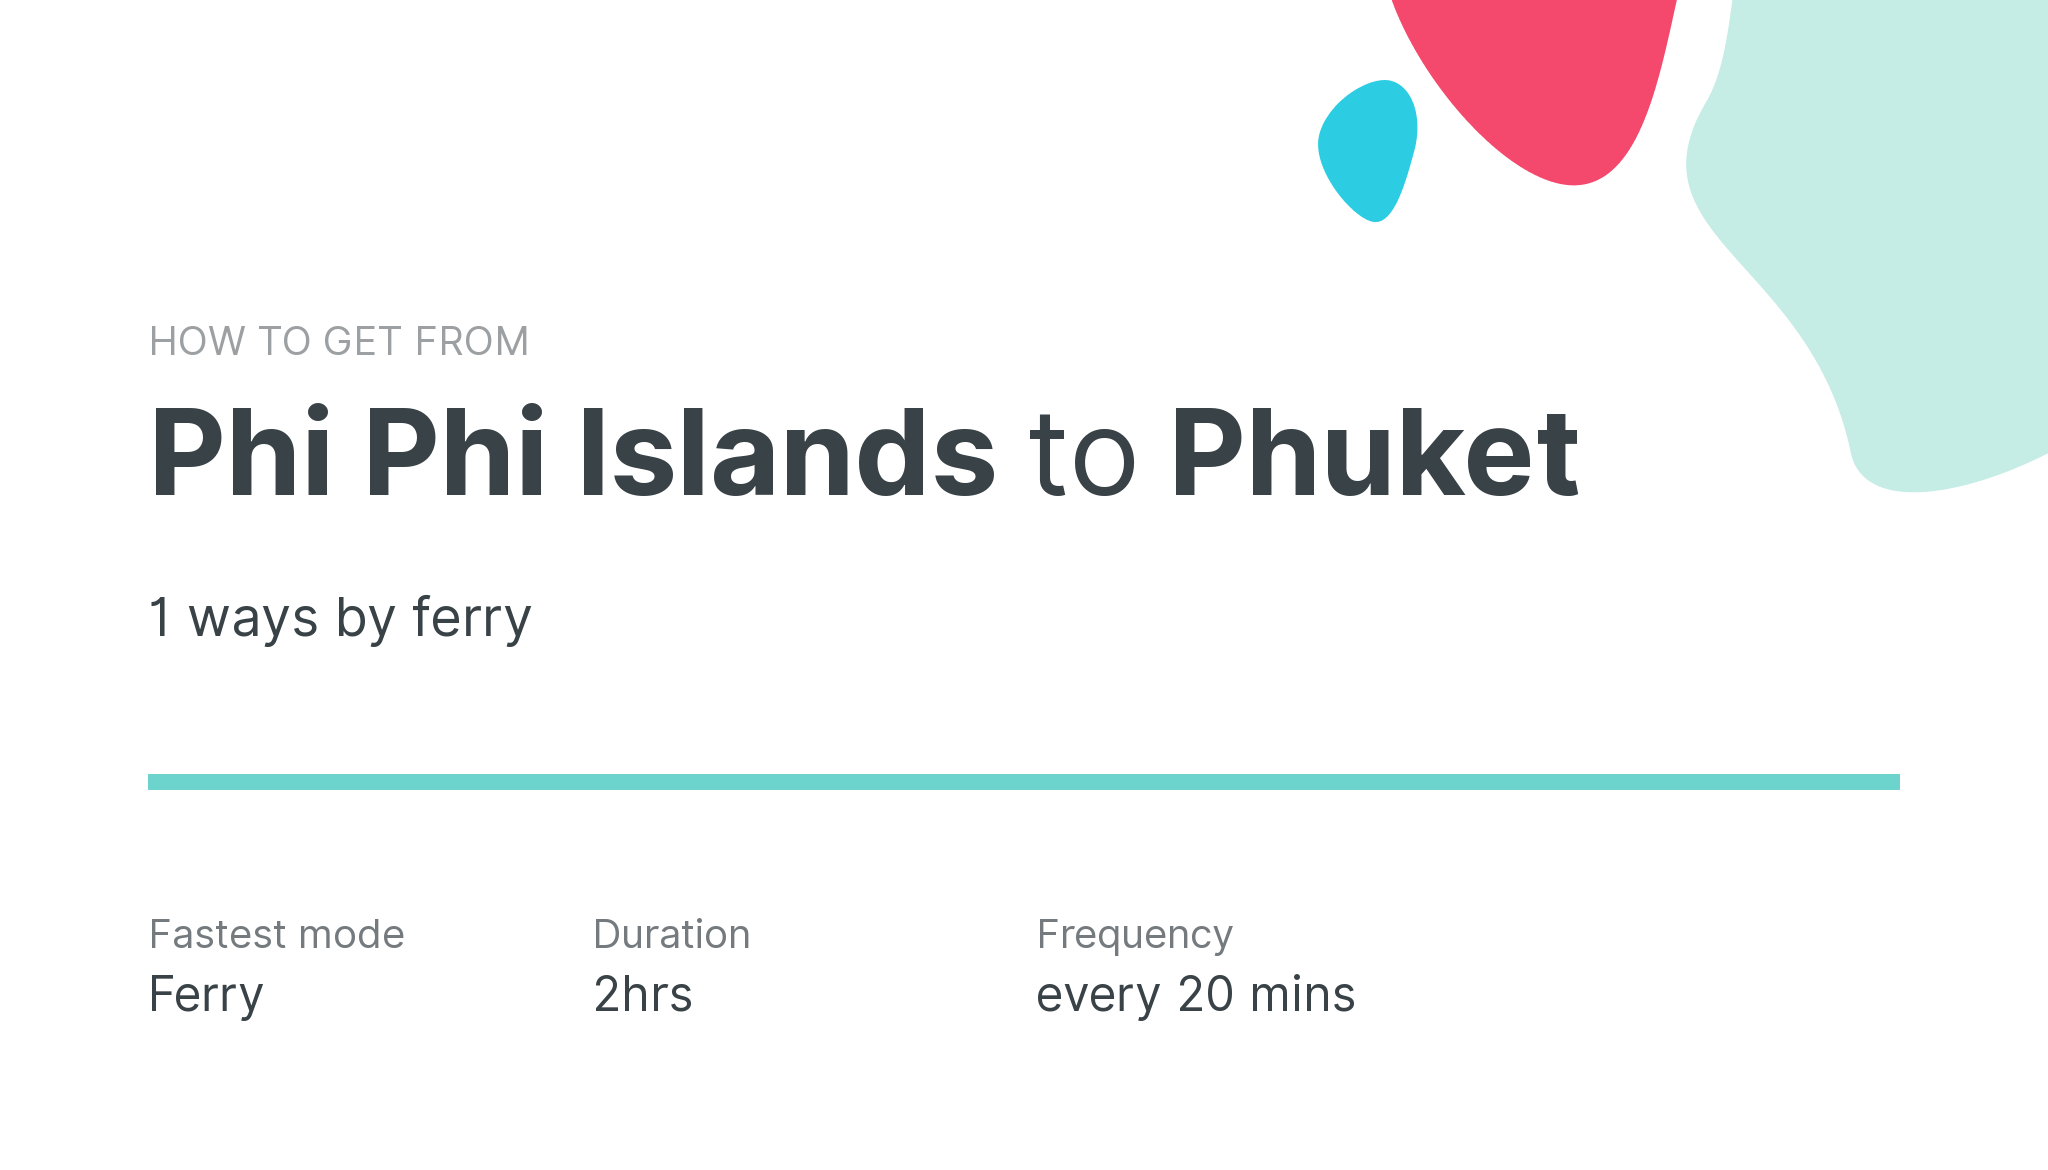 How do I get from Phi Phi Islands to Phuket